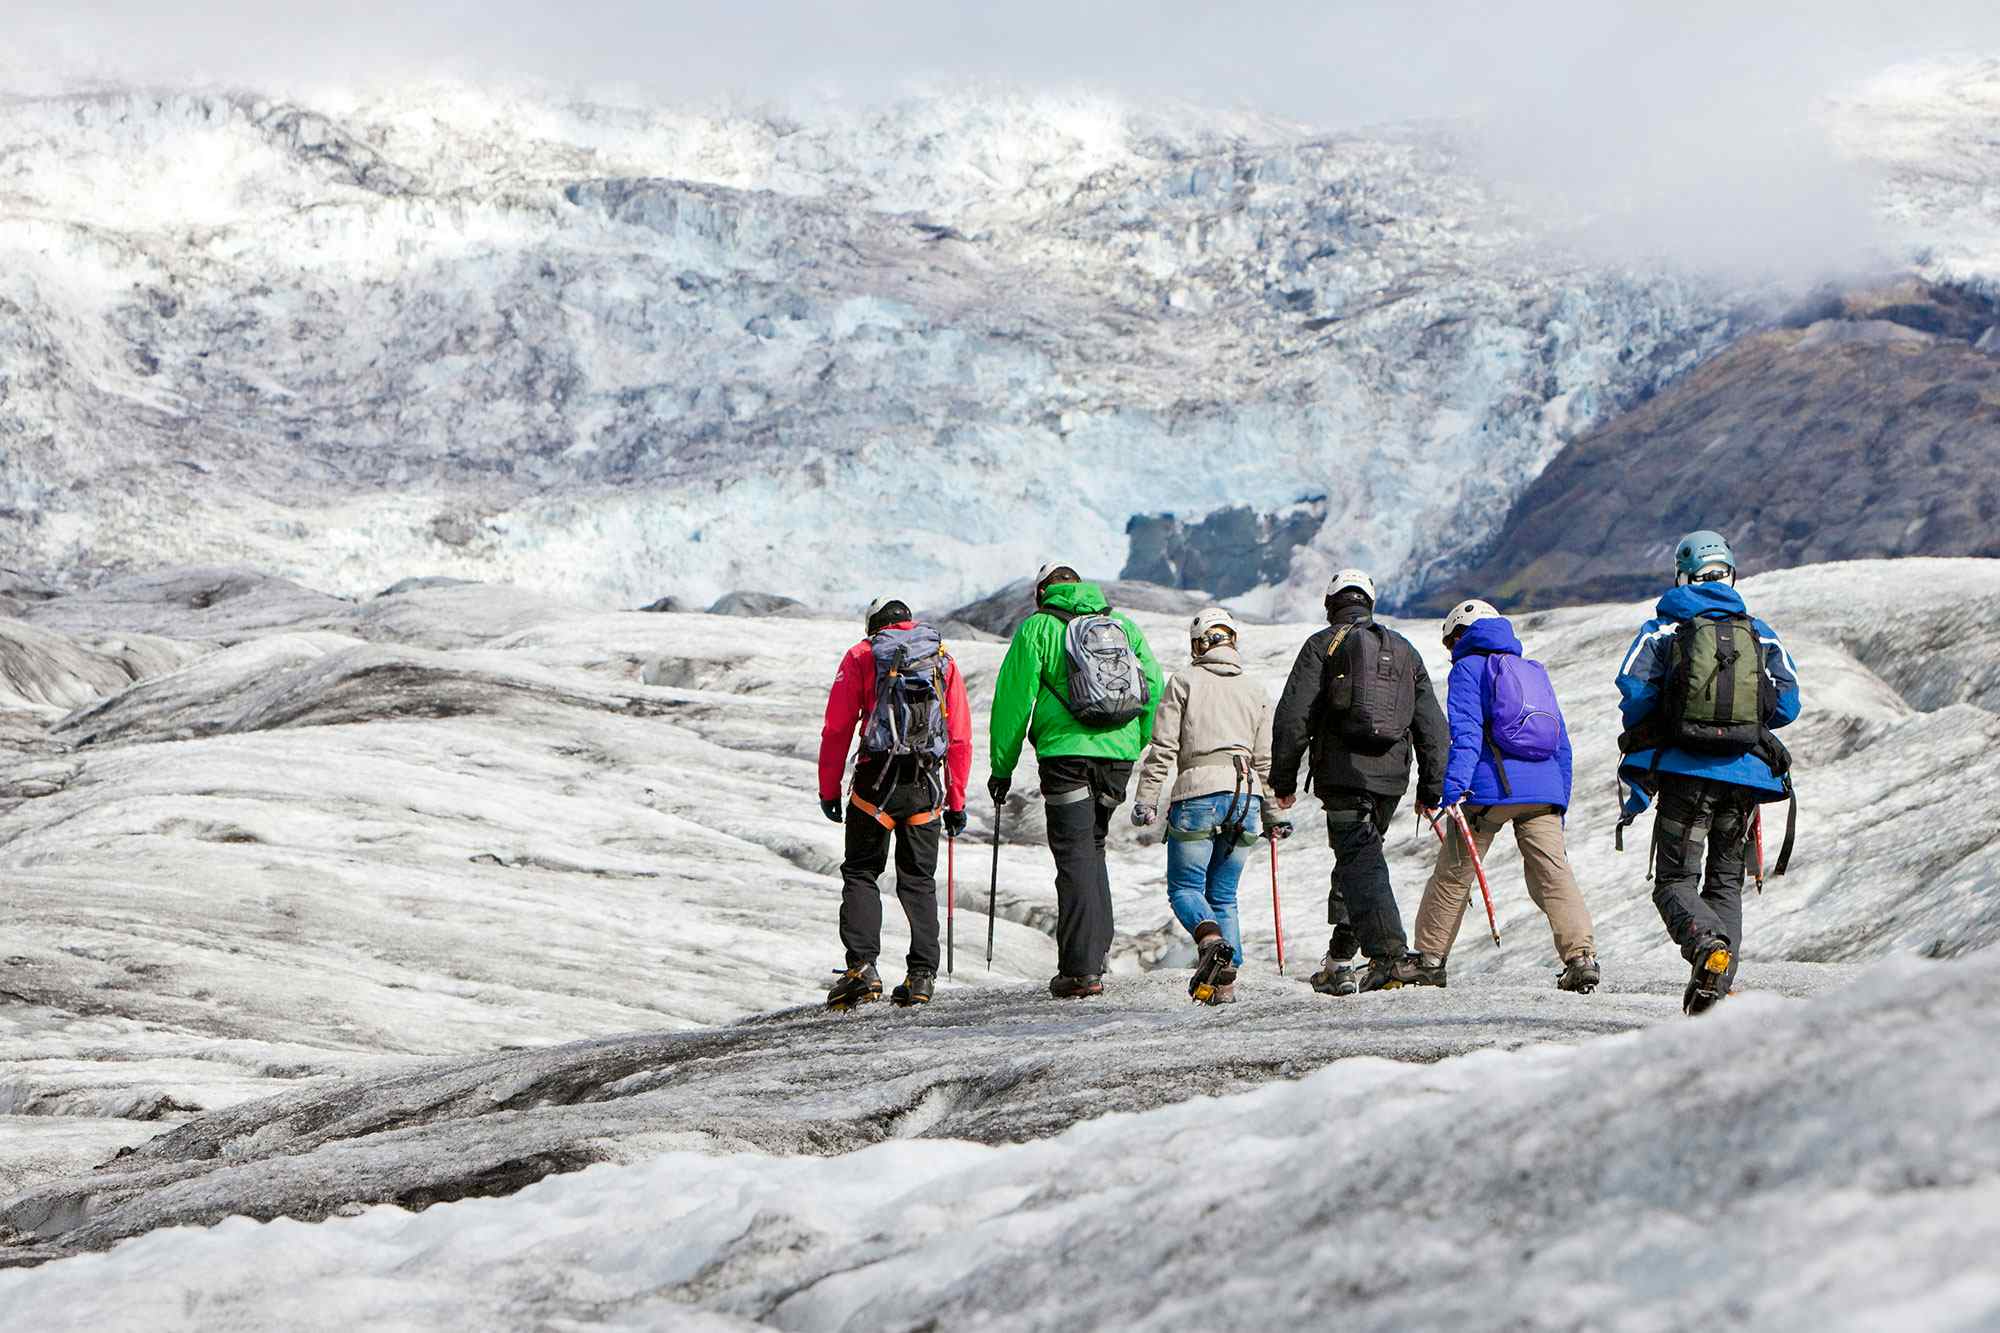 Glacier hiking in Iceland. Photo: Host/Icelandic Mountain Guides